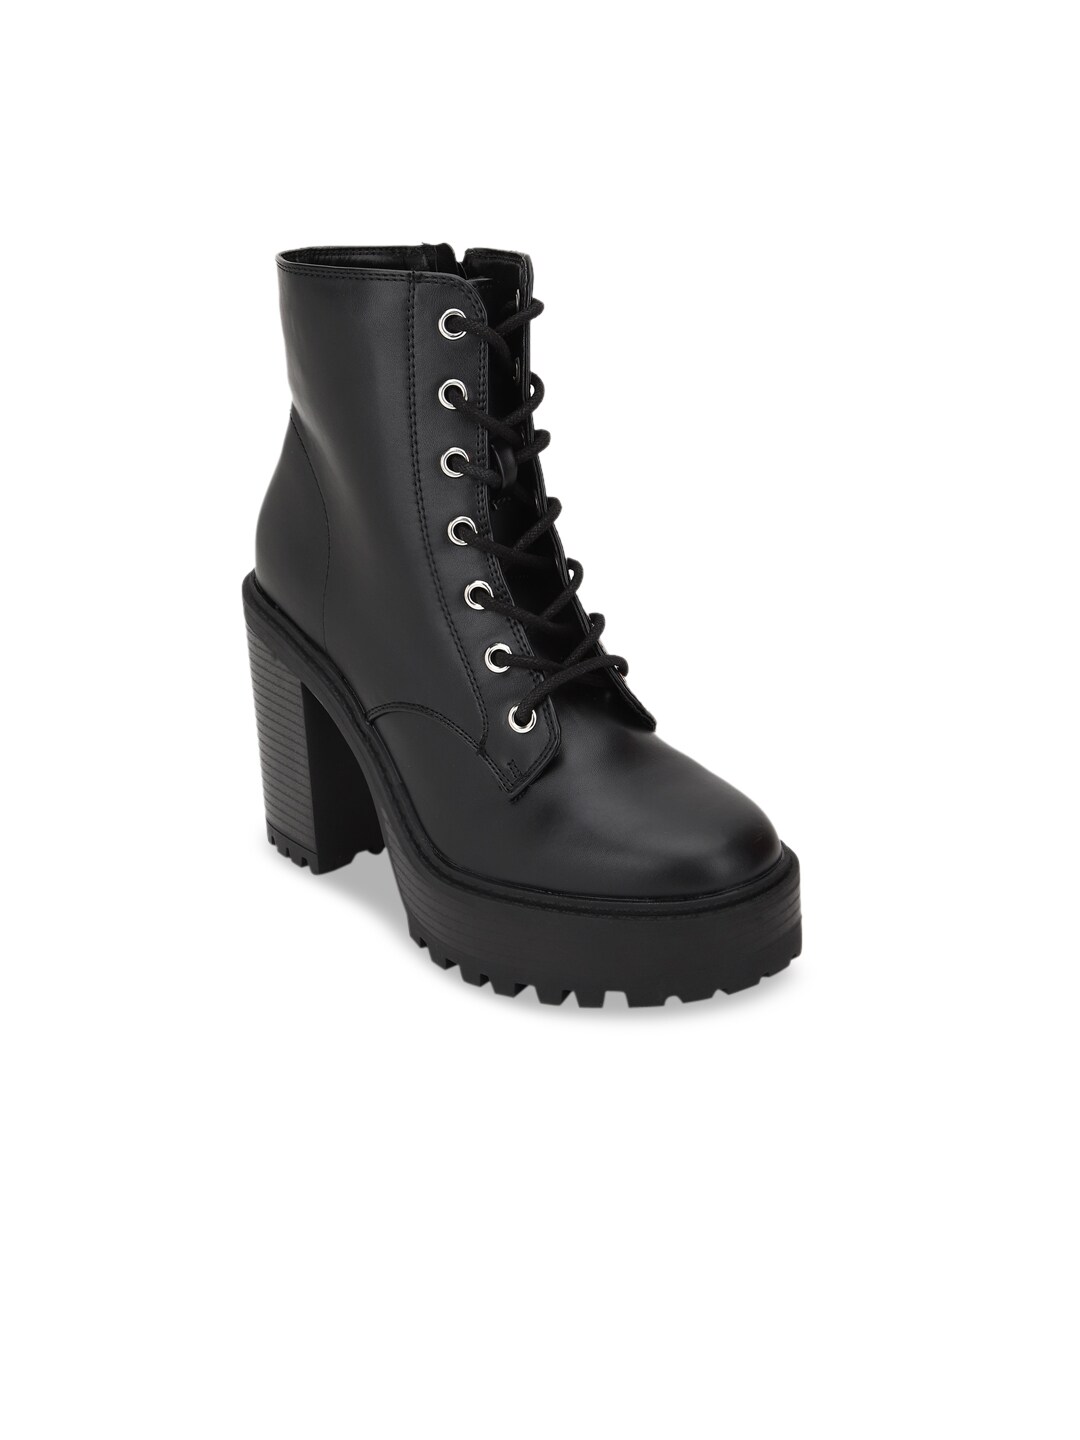 FOREVER 21 Black PU Platform Heeled Boots Price in India